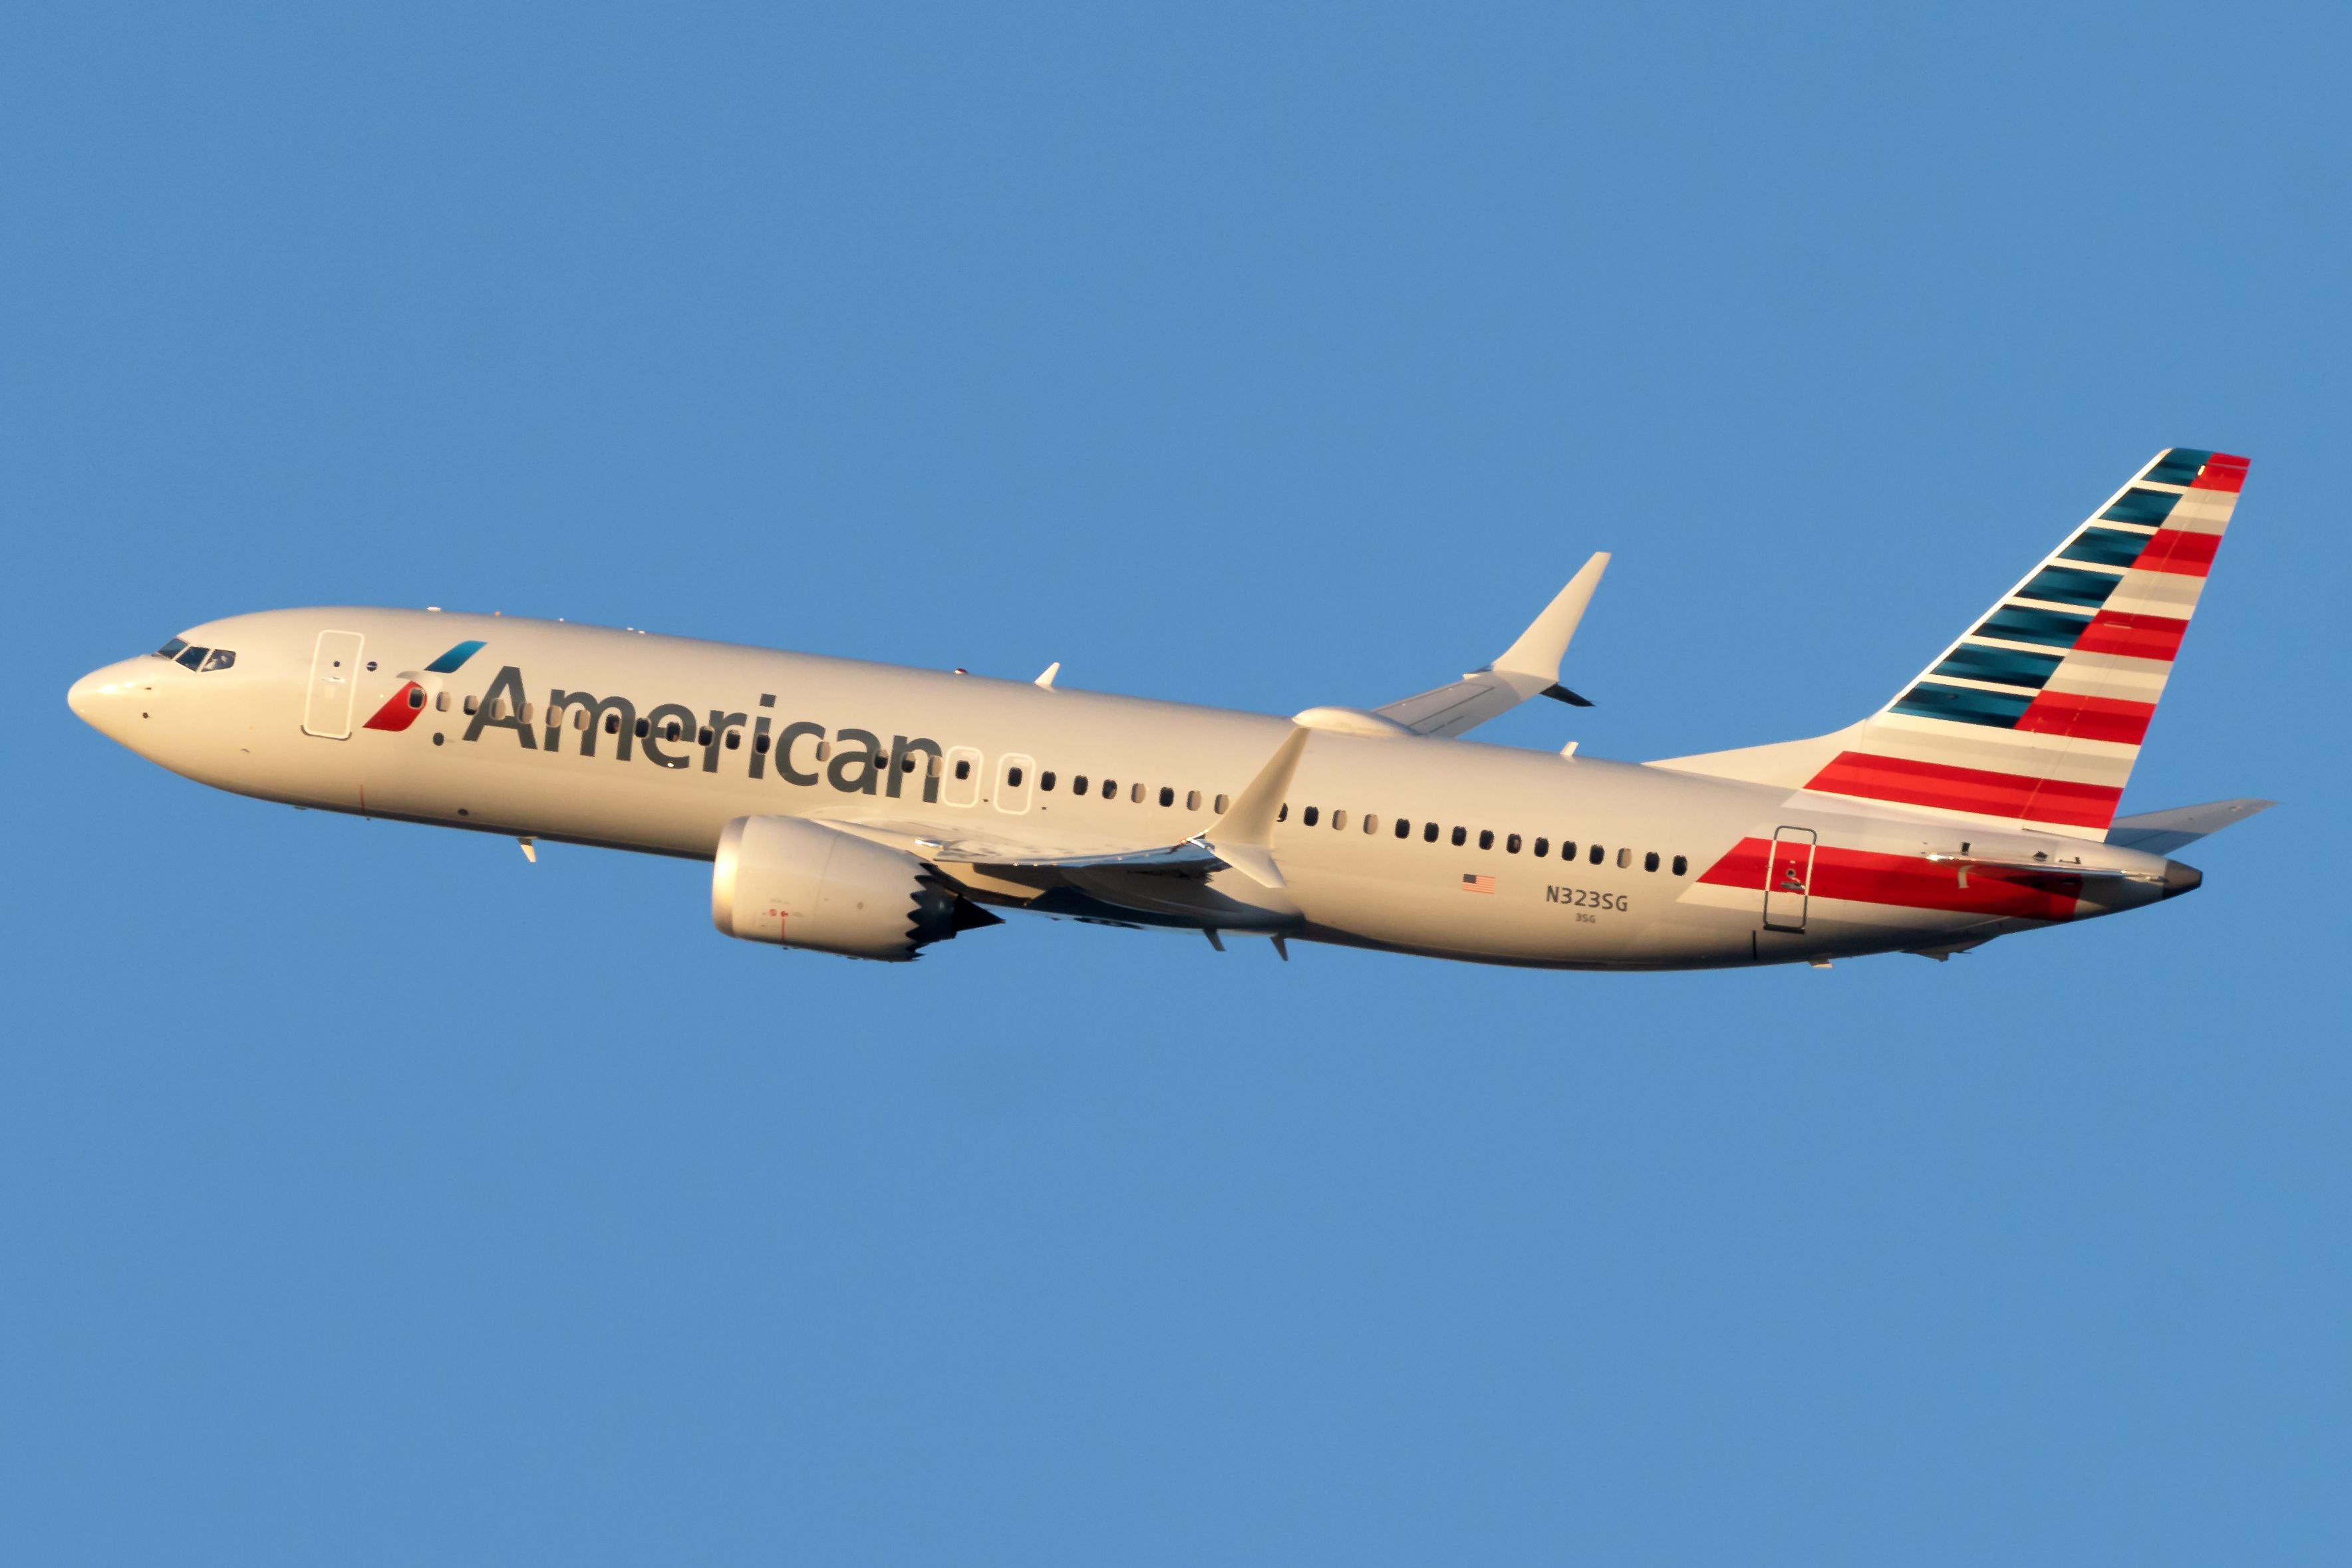 American Airlines AA338 had to make an emergency landing at Miami Airport due to fumes in the cabin